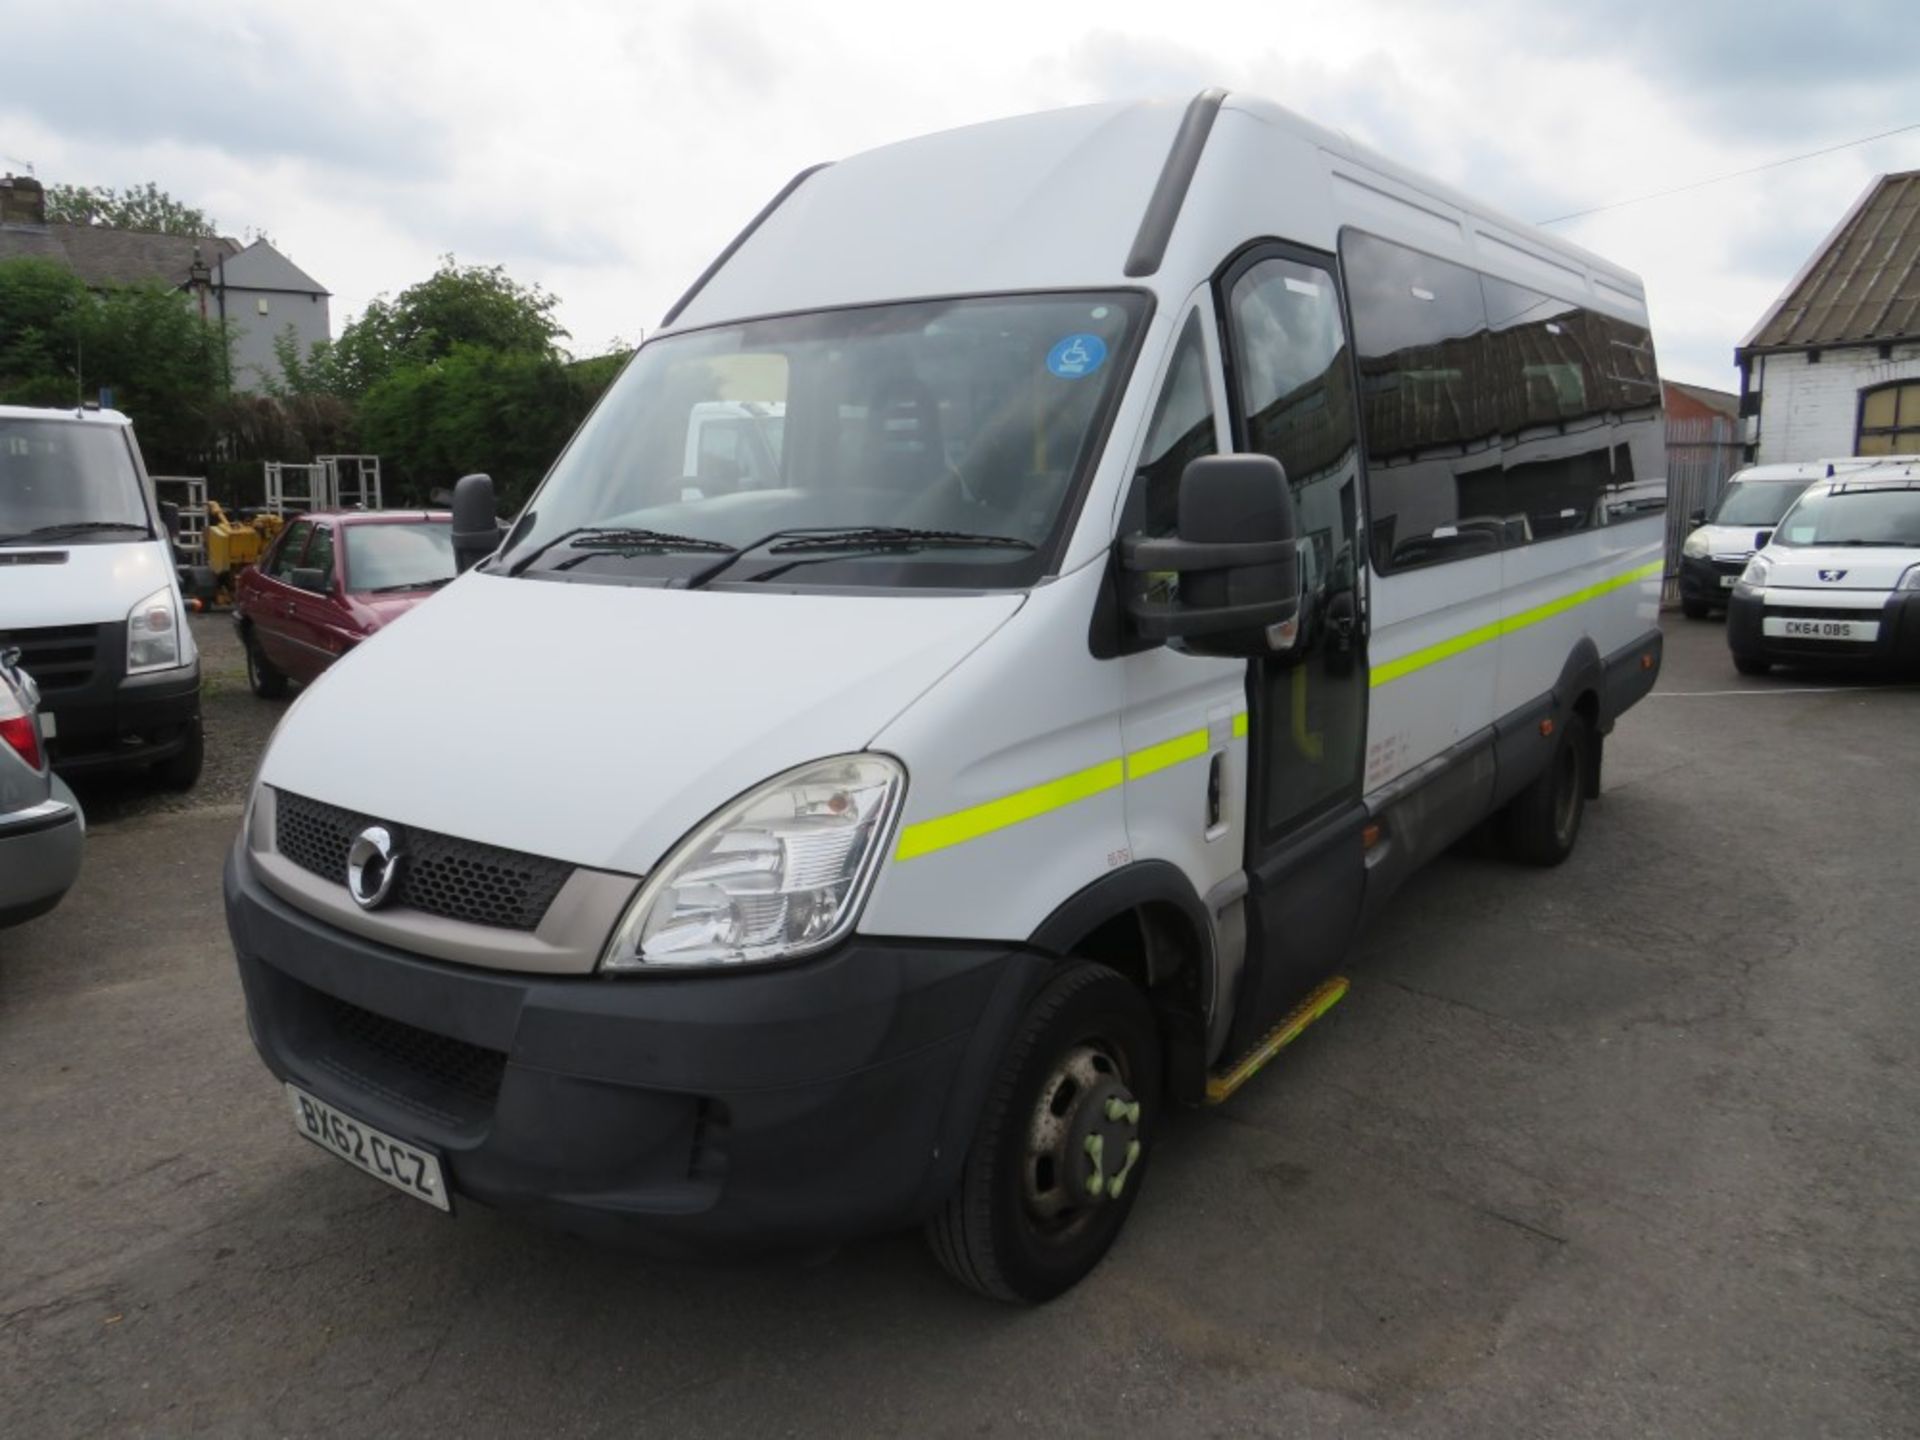 62 reg IRIS DAILY 50C17 ACCESSIBLE MINIBUS (DIRECT COUNCIL) 1ST REG 09/12, 135102M, V5 HERE, 1 OWNER - Image 2 of 7